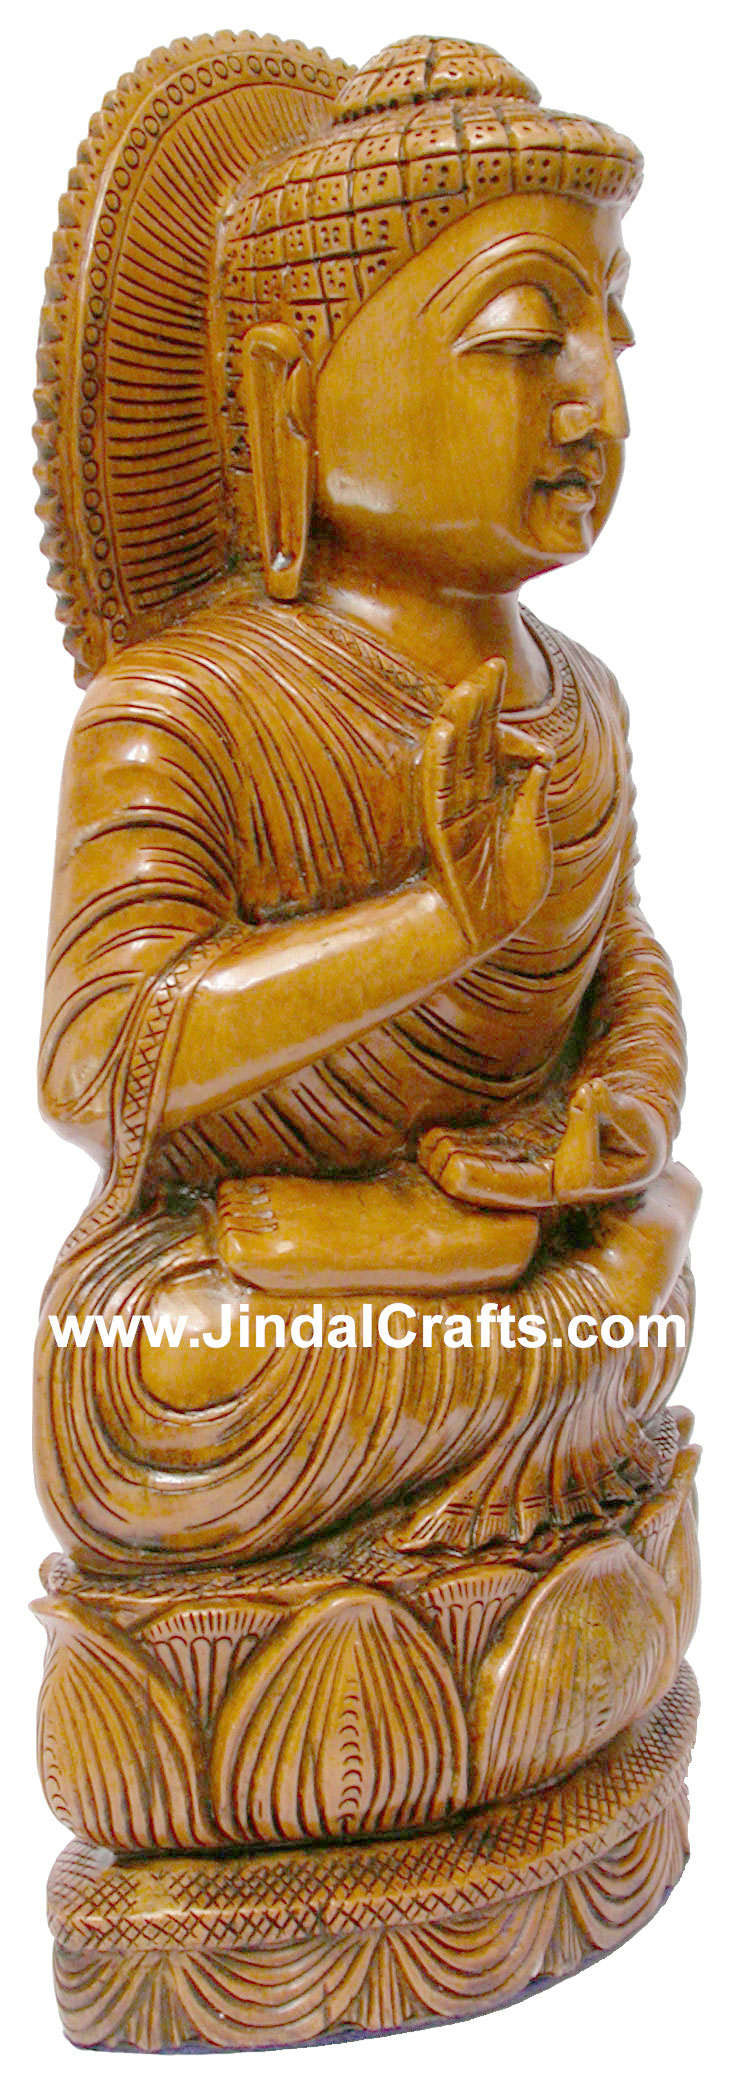 Wood Sculpture Glowing Antique Look Buddha Figure India